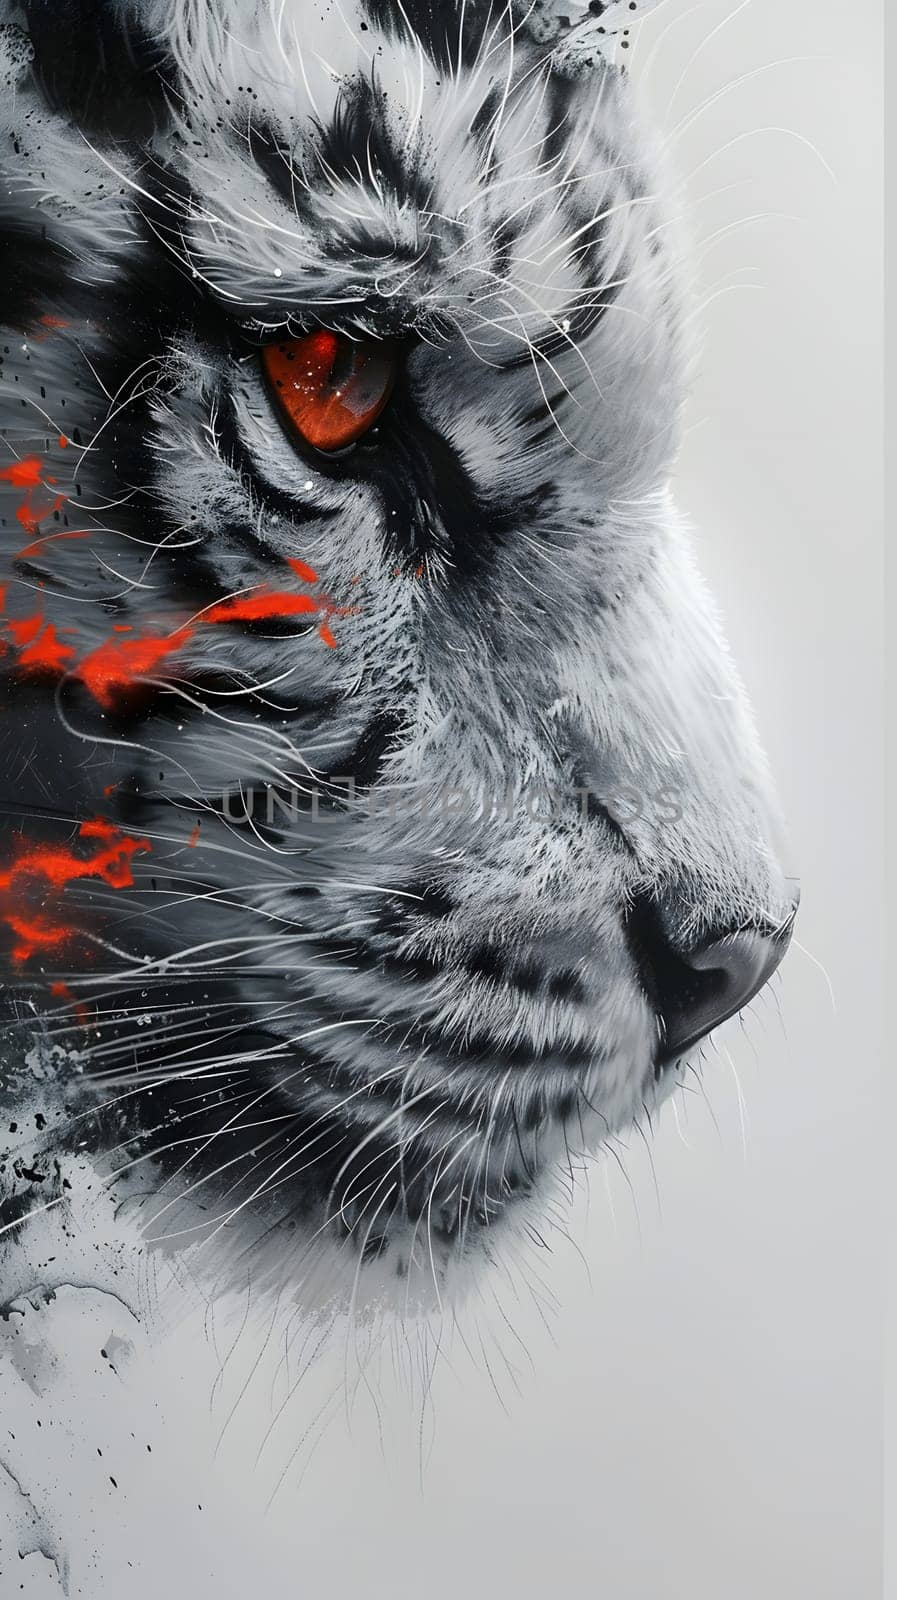 A closeup art piece capturing the red eyes of a tiger, a large felidae carnivore with whiskers and a powerful snout. This terrestrial animal is a mesmerizing subject against a white background